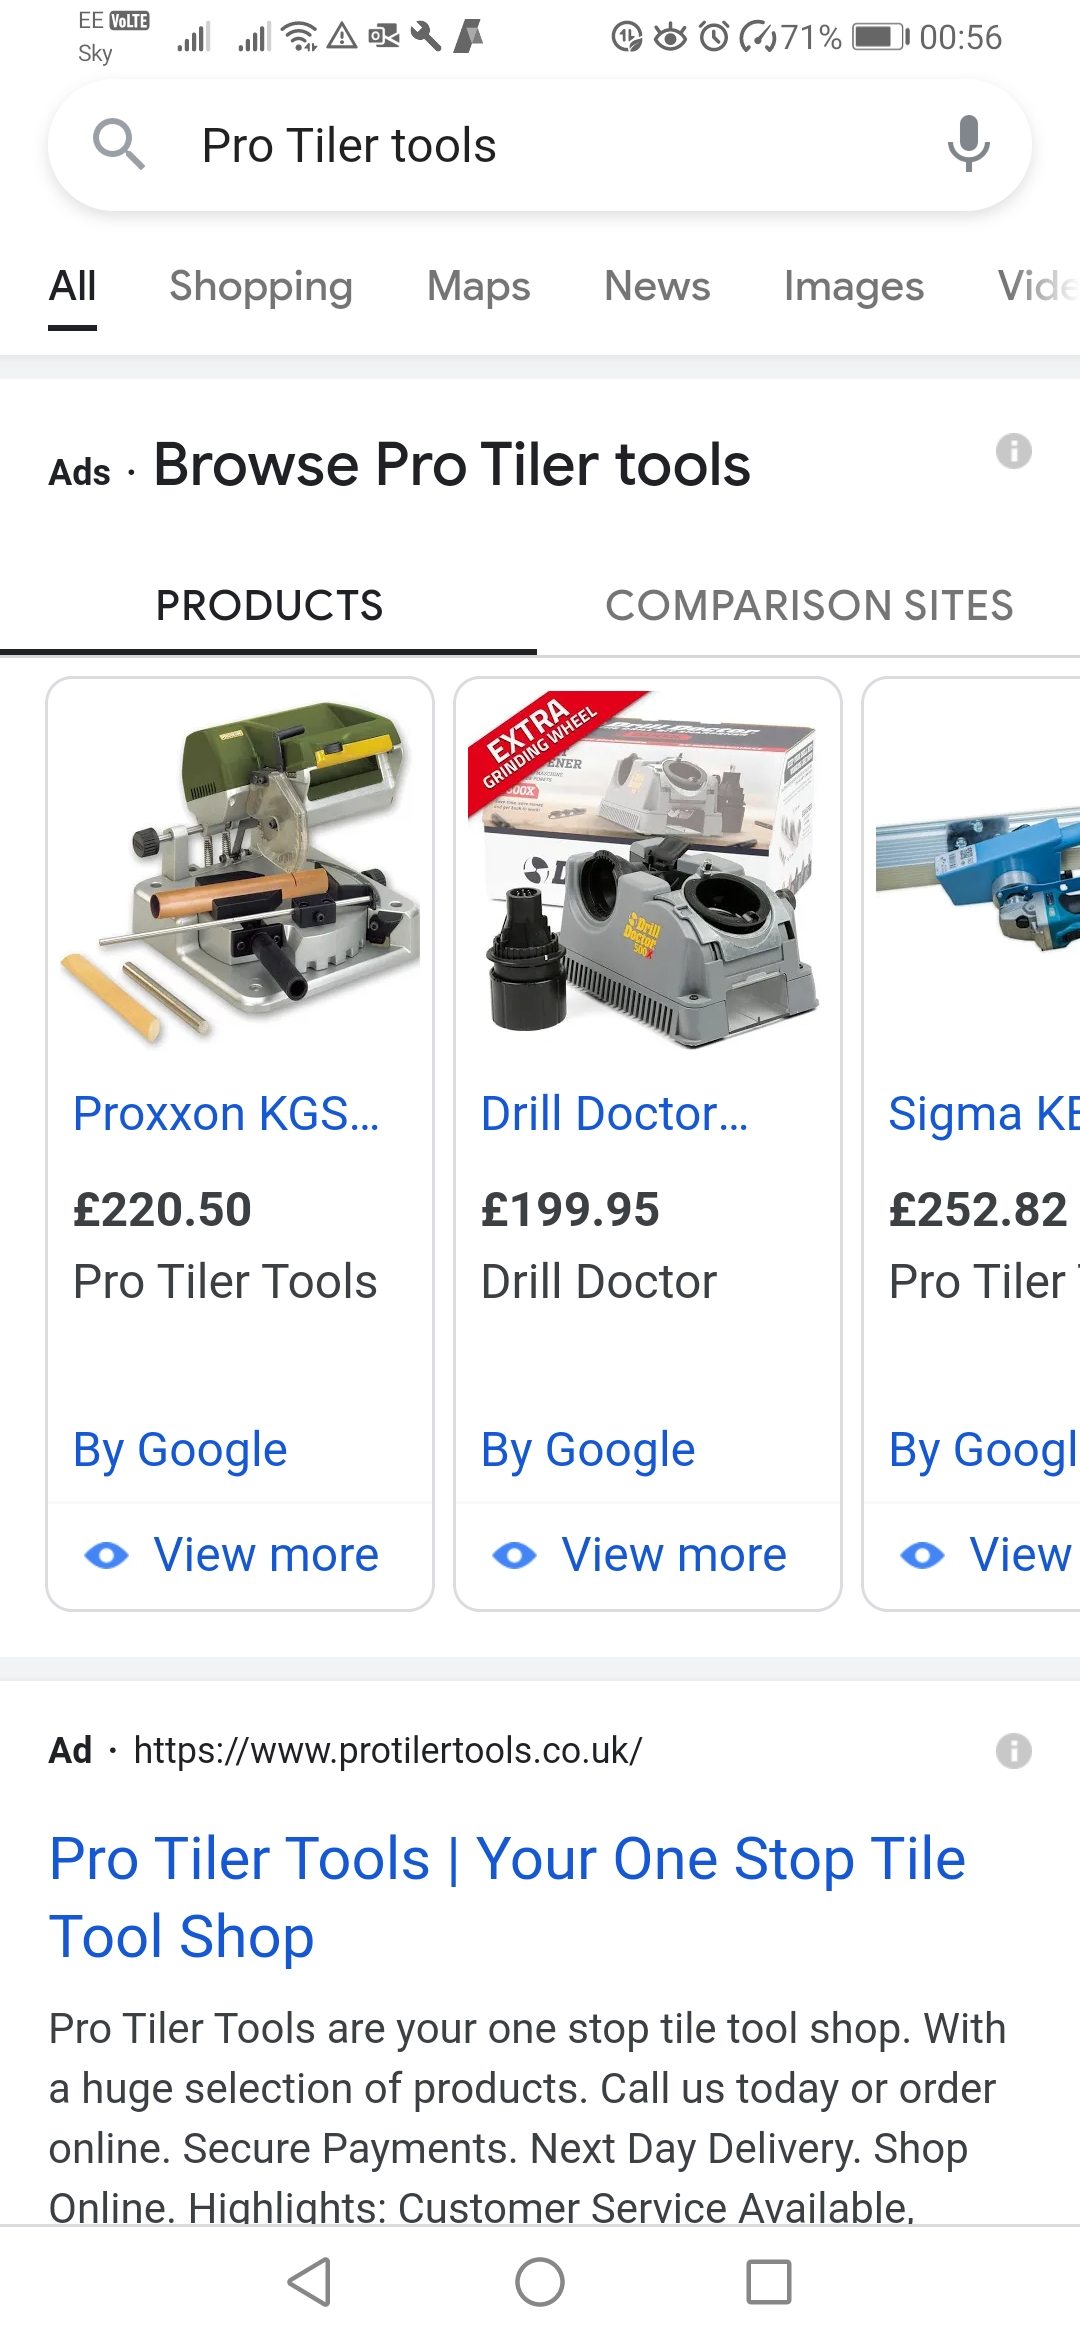 Pro Tiler Tools | Paying ads to rank for their own name.. what’s this, 2009?